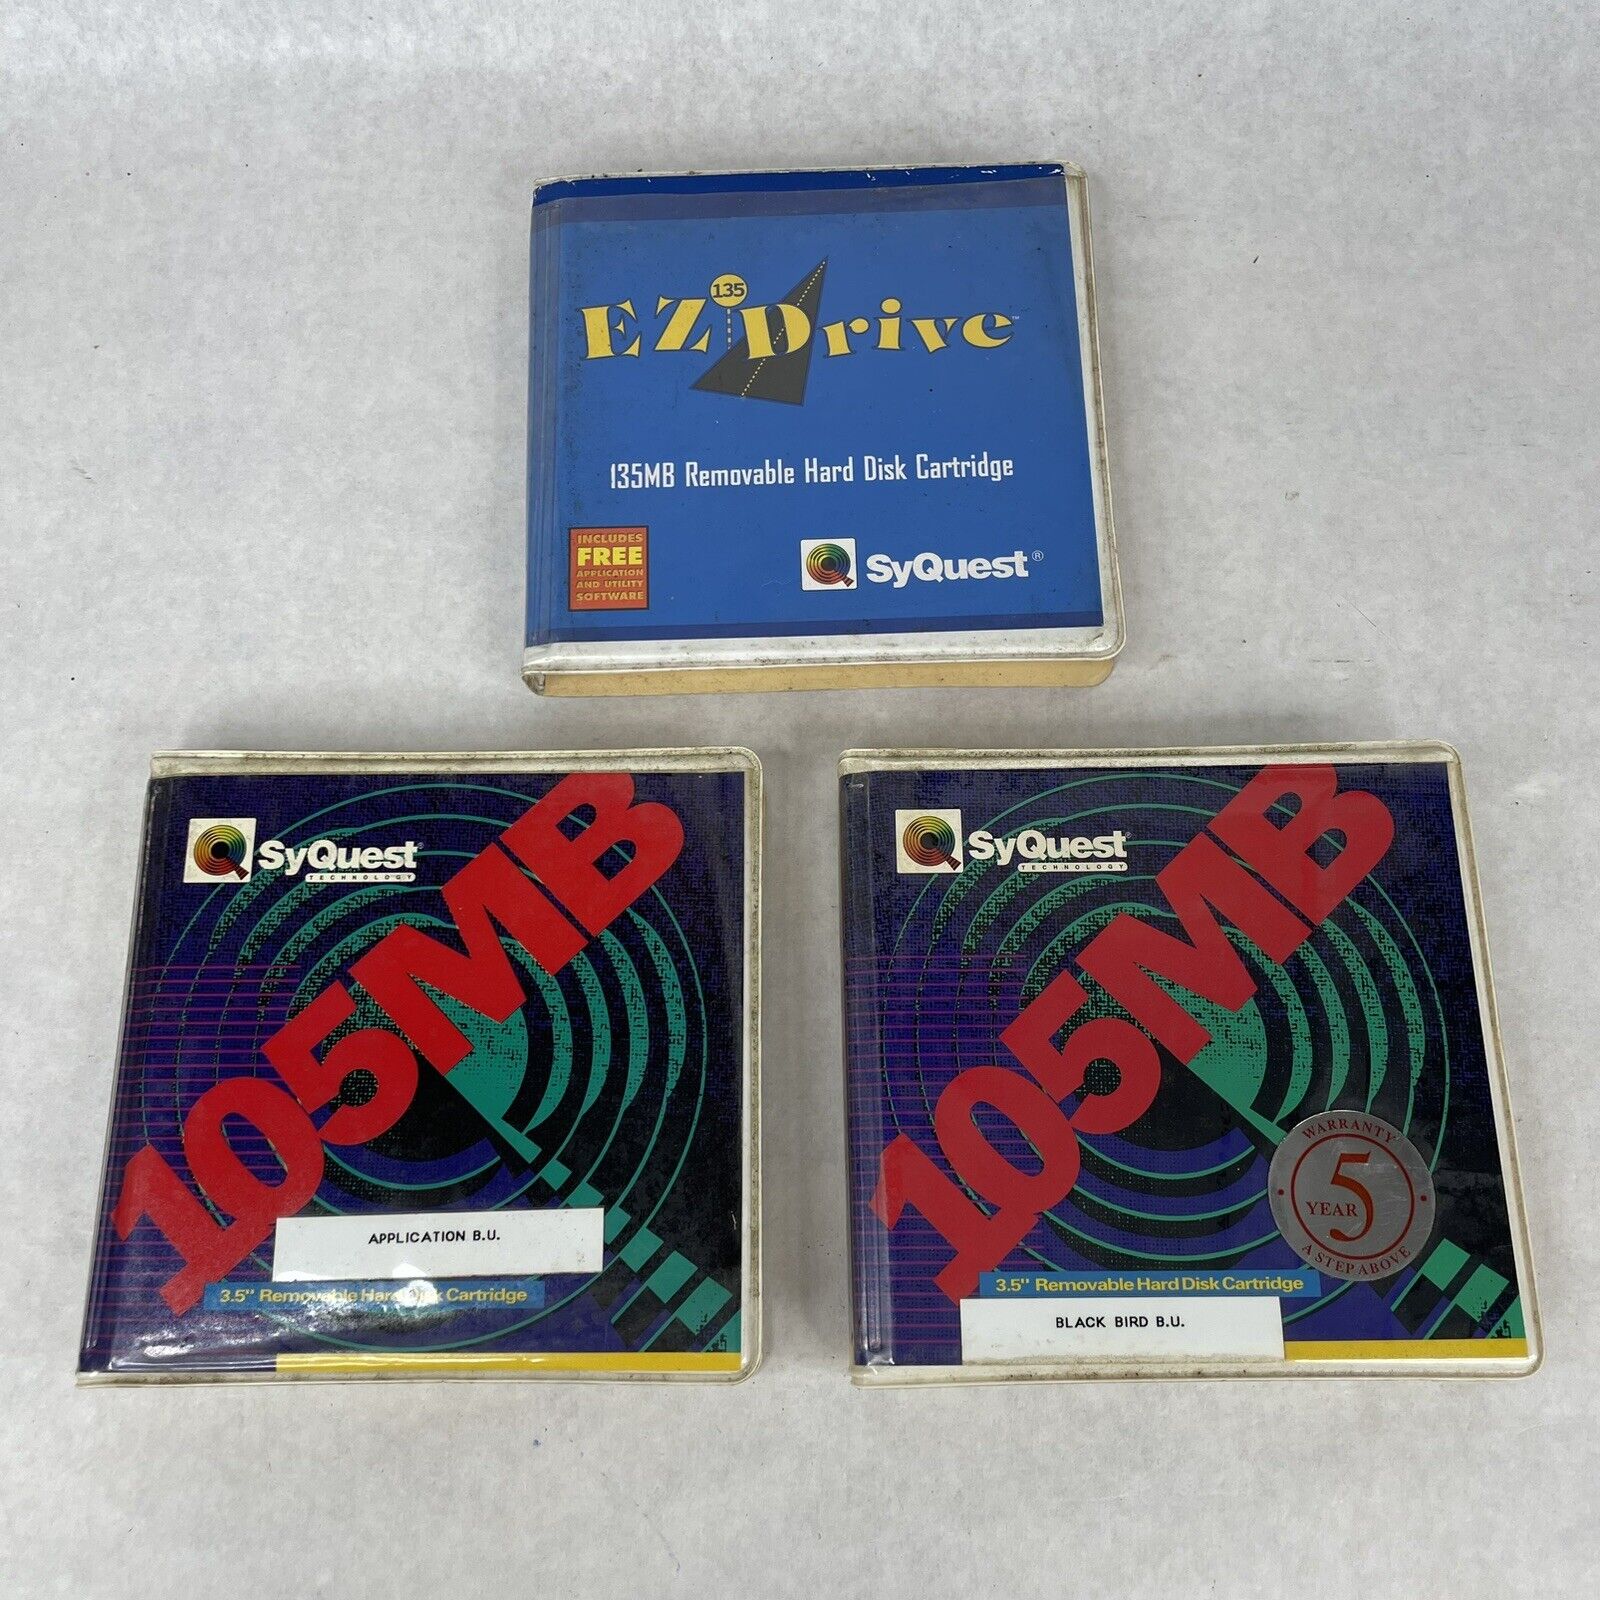 Lot of 3 SyQuest 3.5” Removable Hard Disks Cartridges 105MB, 105MB & 135MB